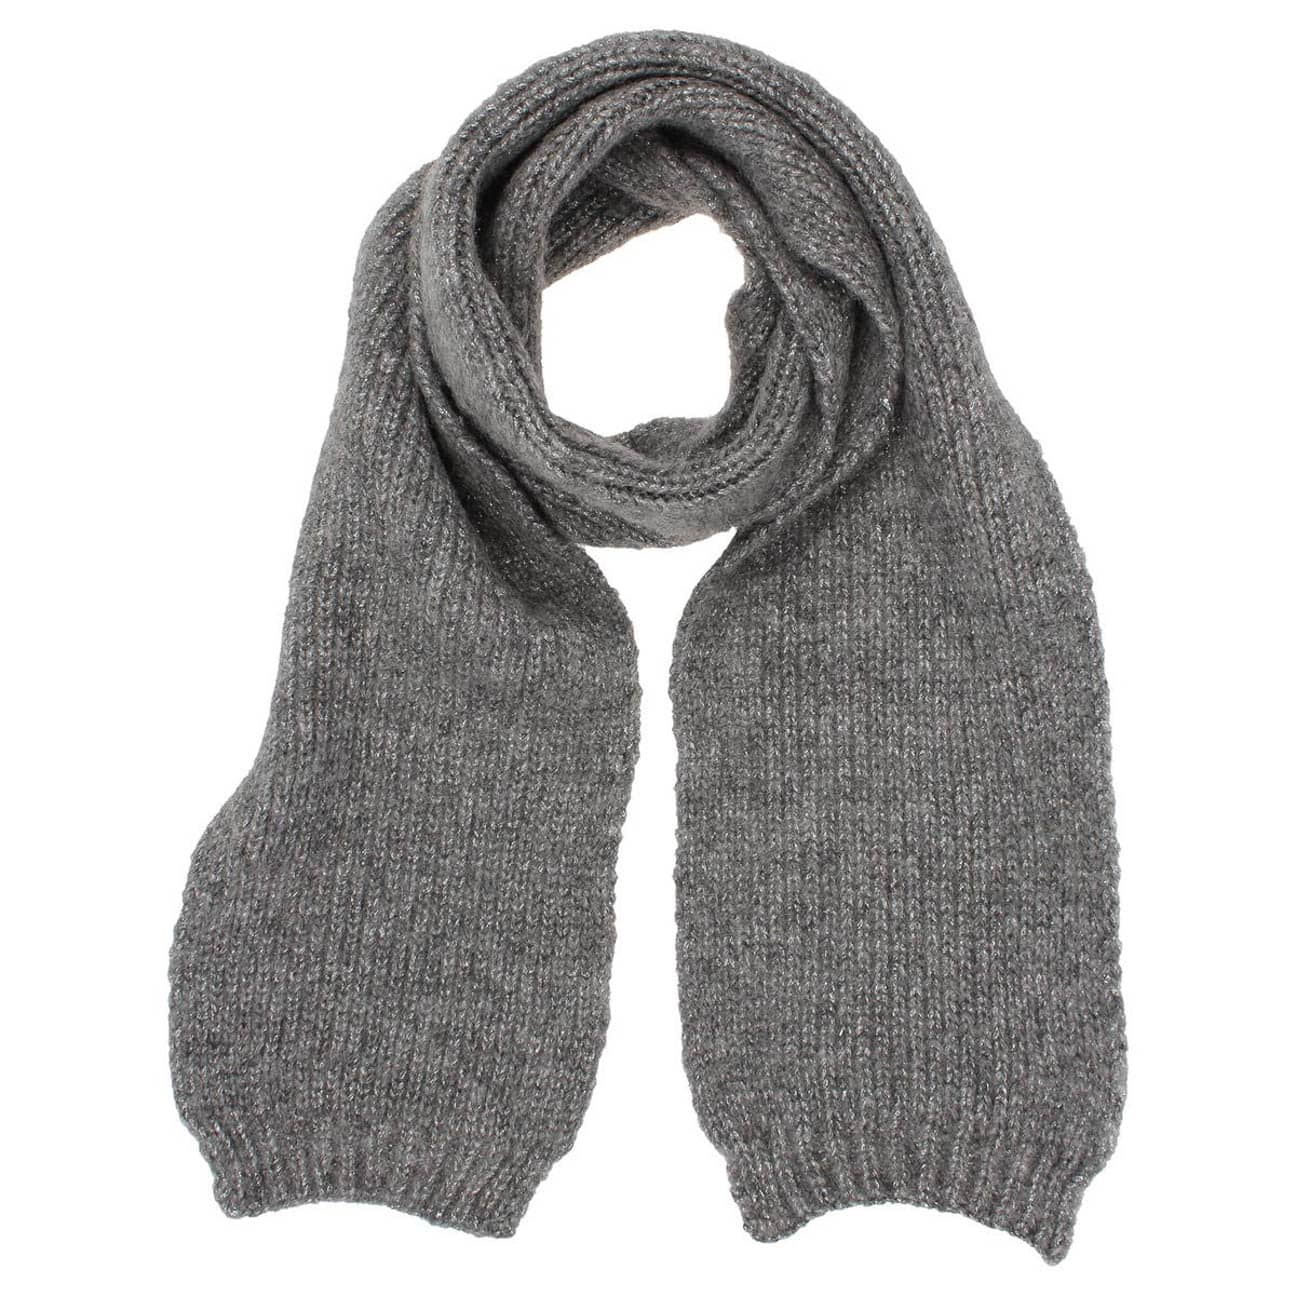 Moa Knit Scarf by McBURN --> Shop Hats, Beanies & Caps online Hatshopping